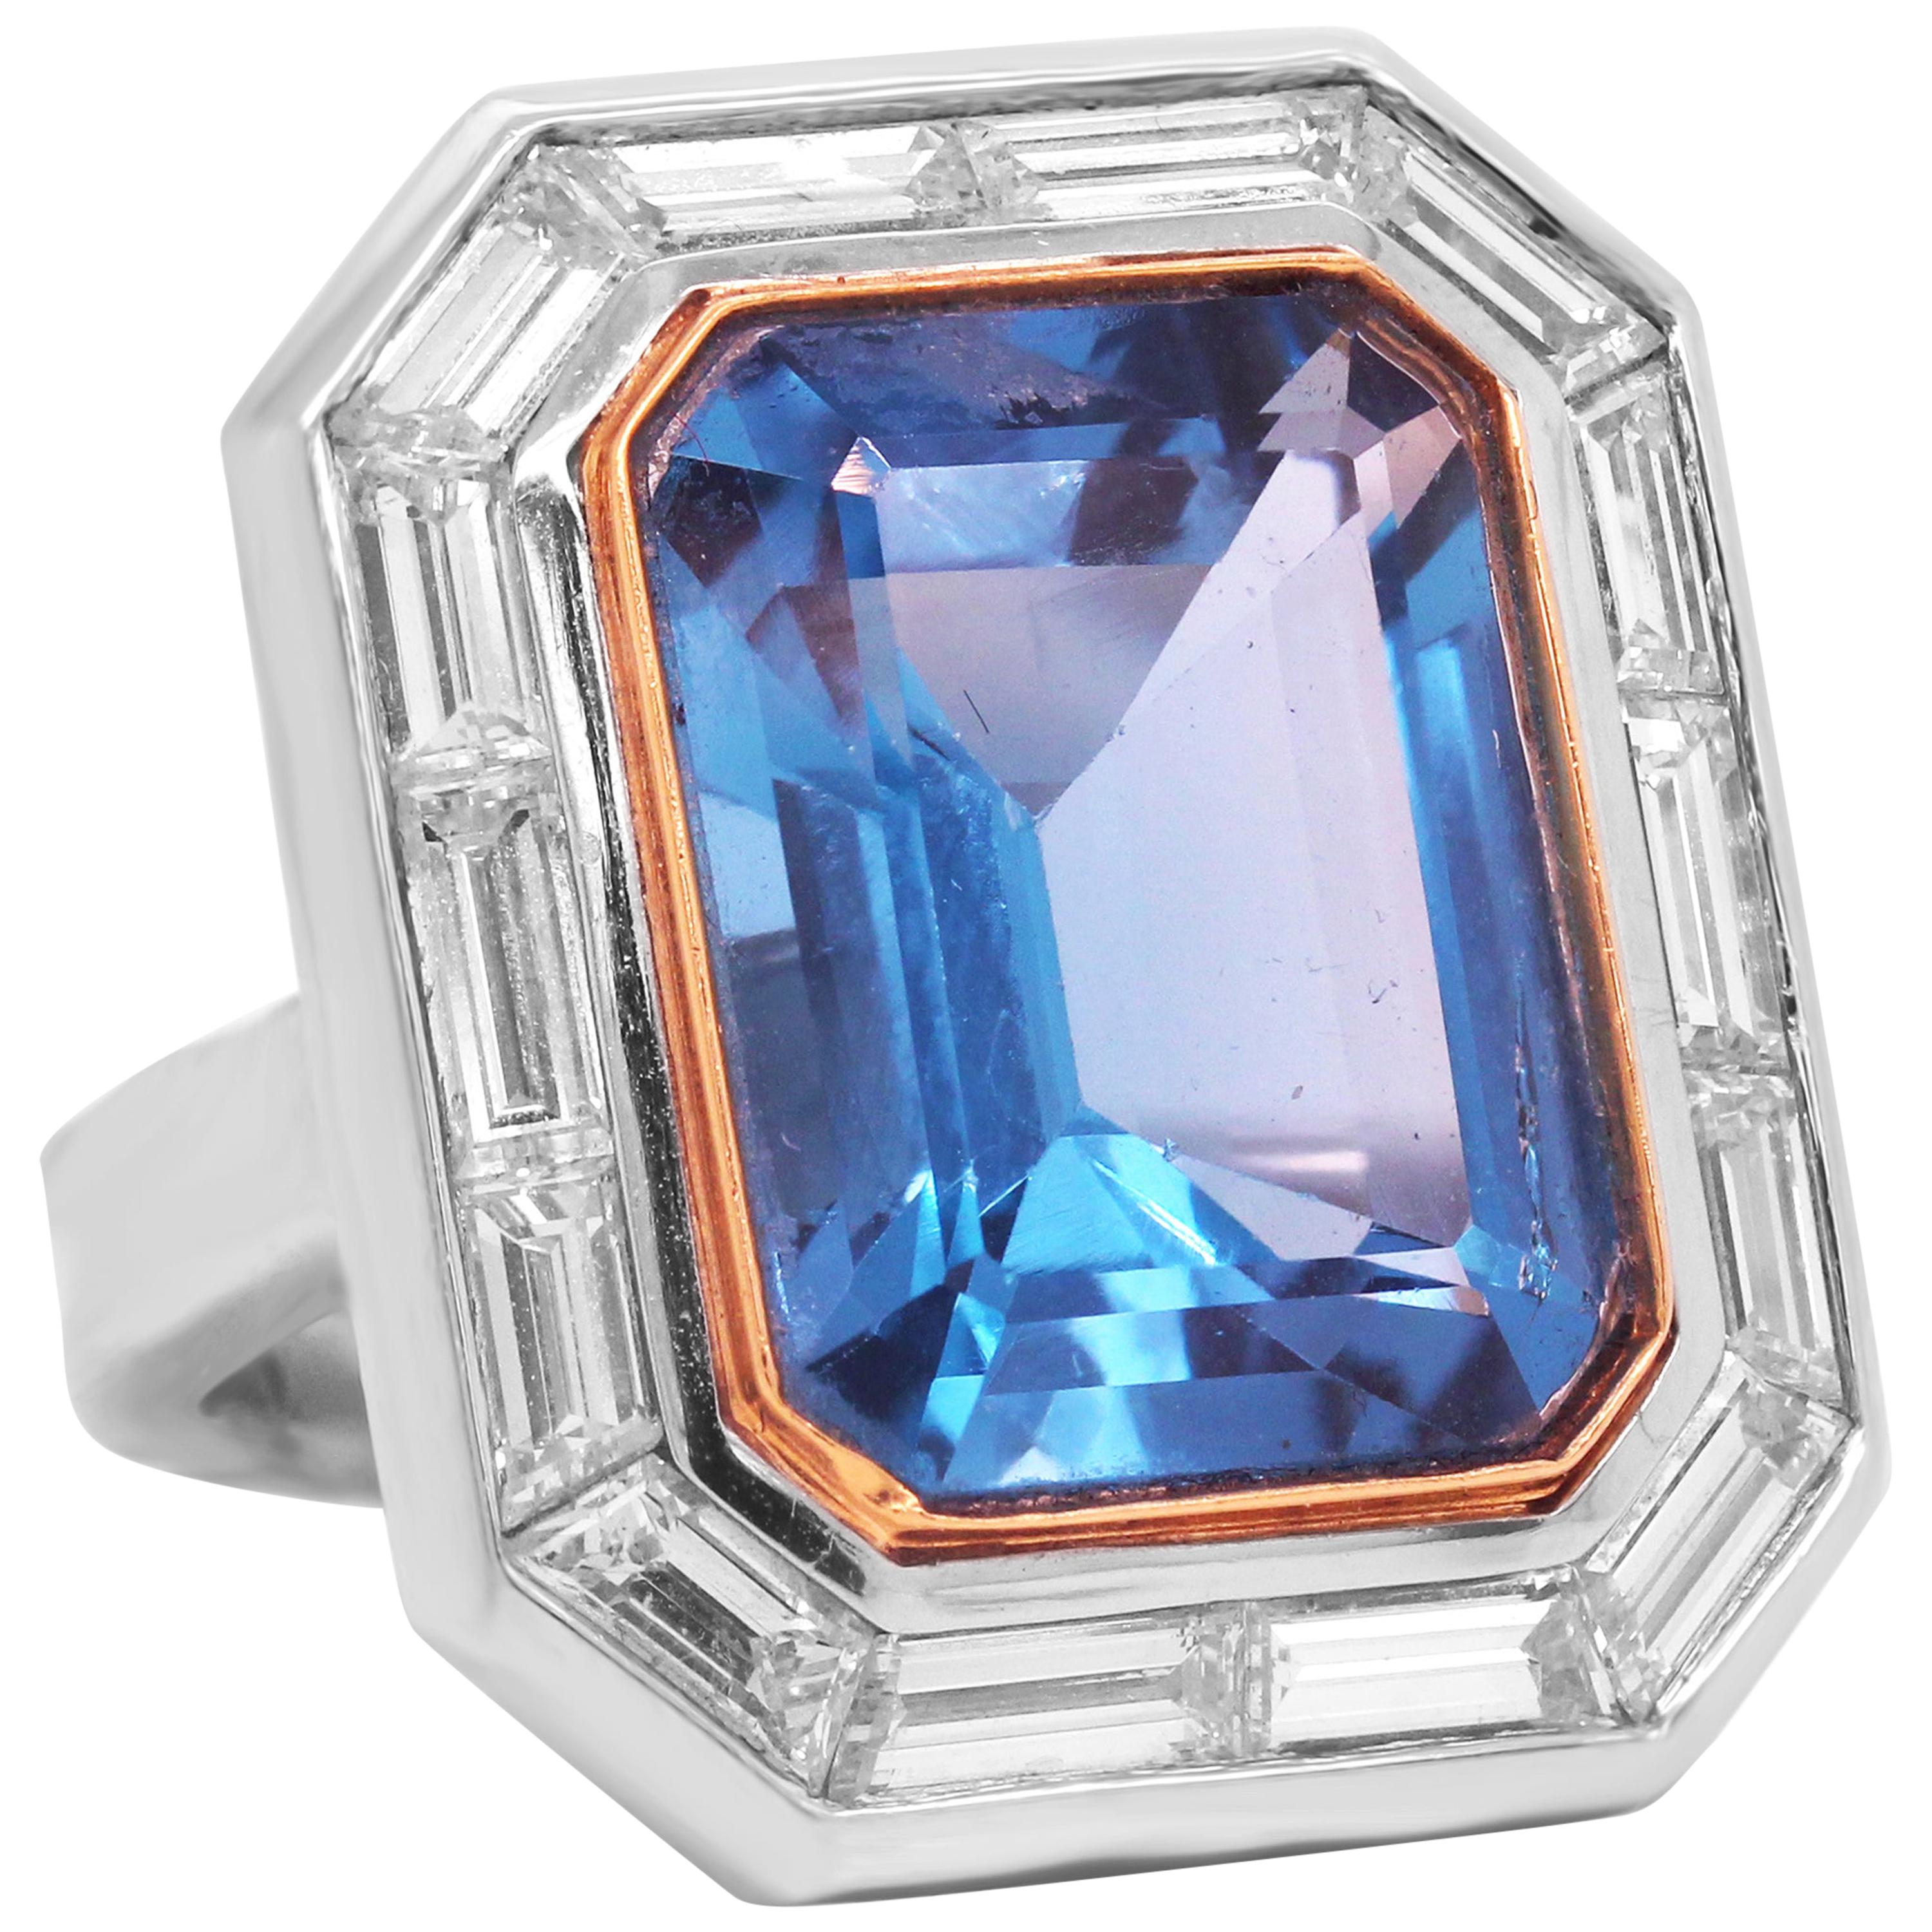 Platinum and Baguette Cut Diamond Ring with Blue Topaz Center For Sale